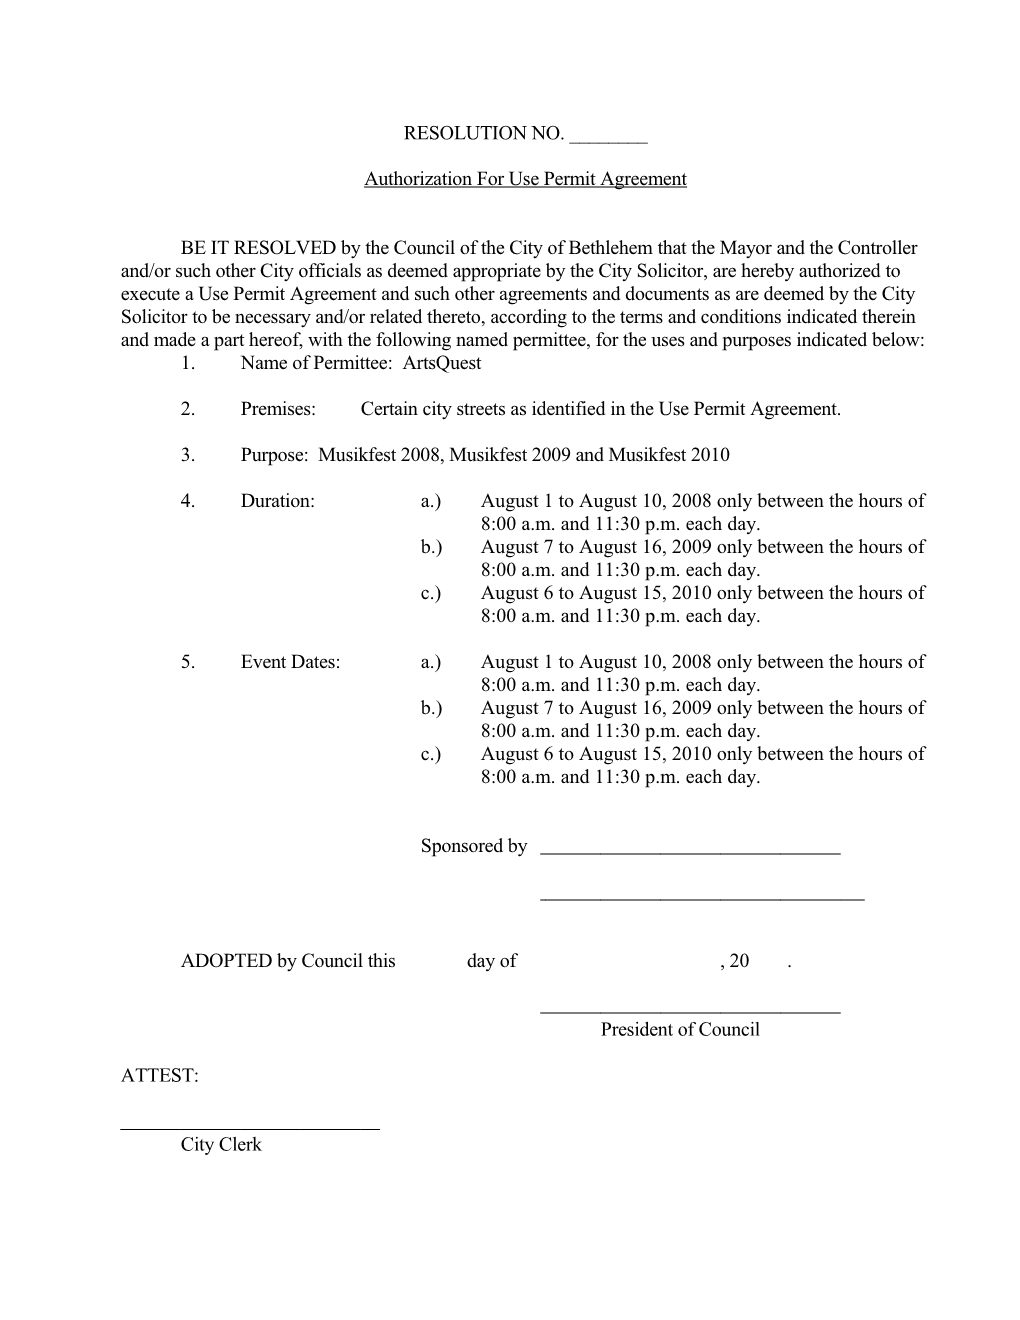 Authorization for Use Permit Agreement